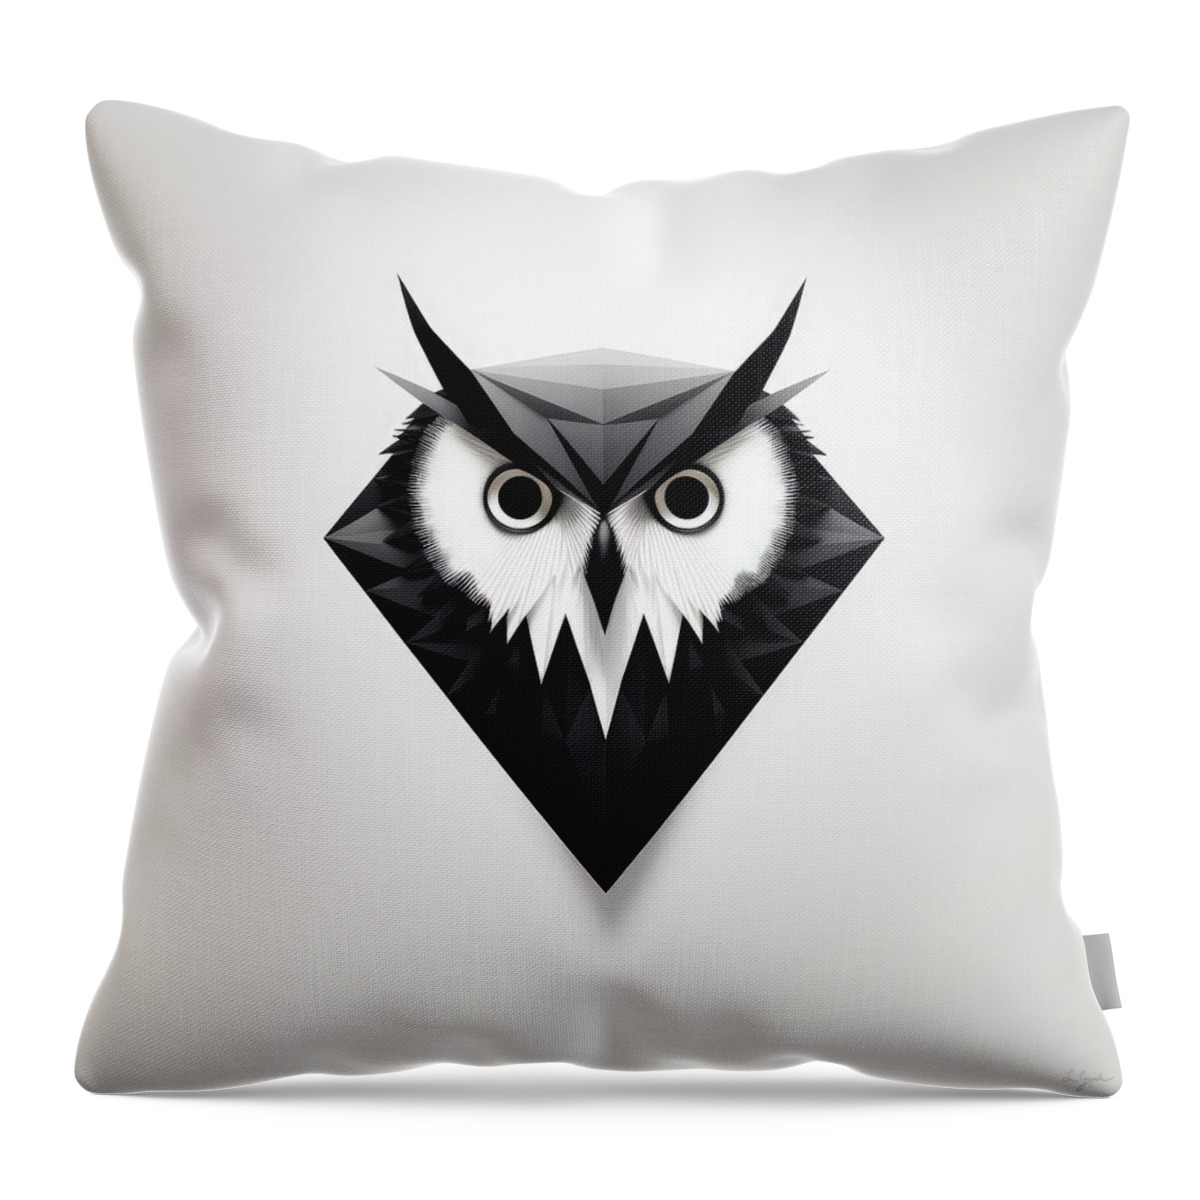 Owl Modern Art Throw Pillow featuring the painting Minimalist Owl by Lourry Legarde